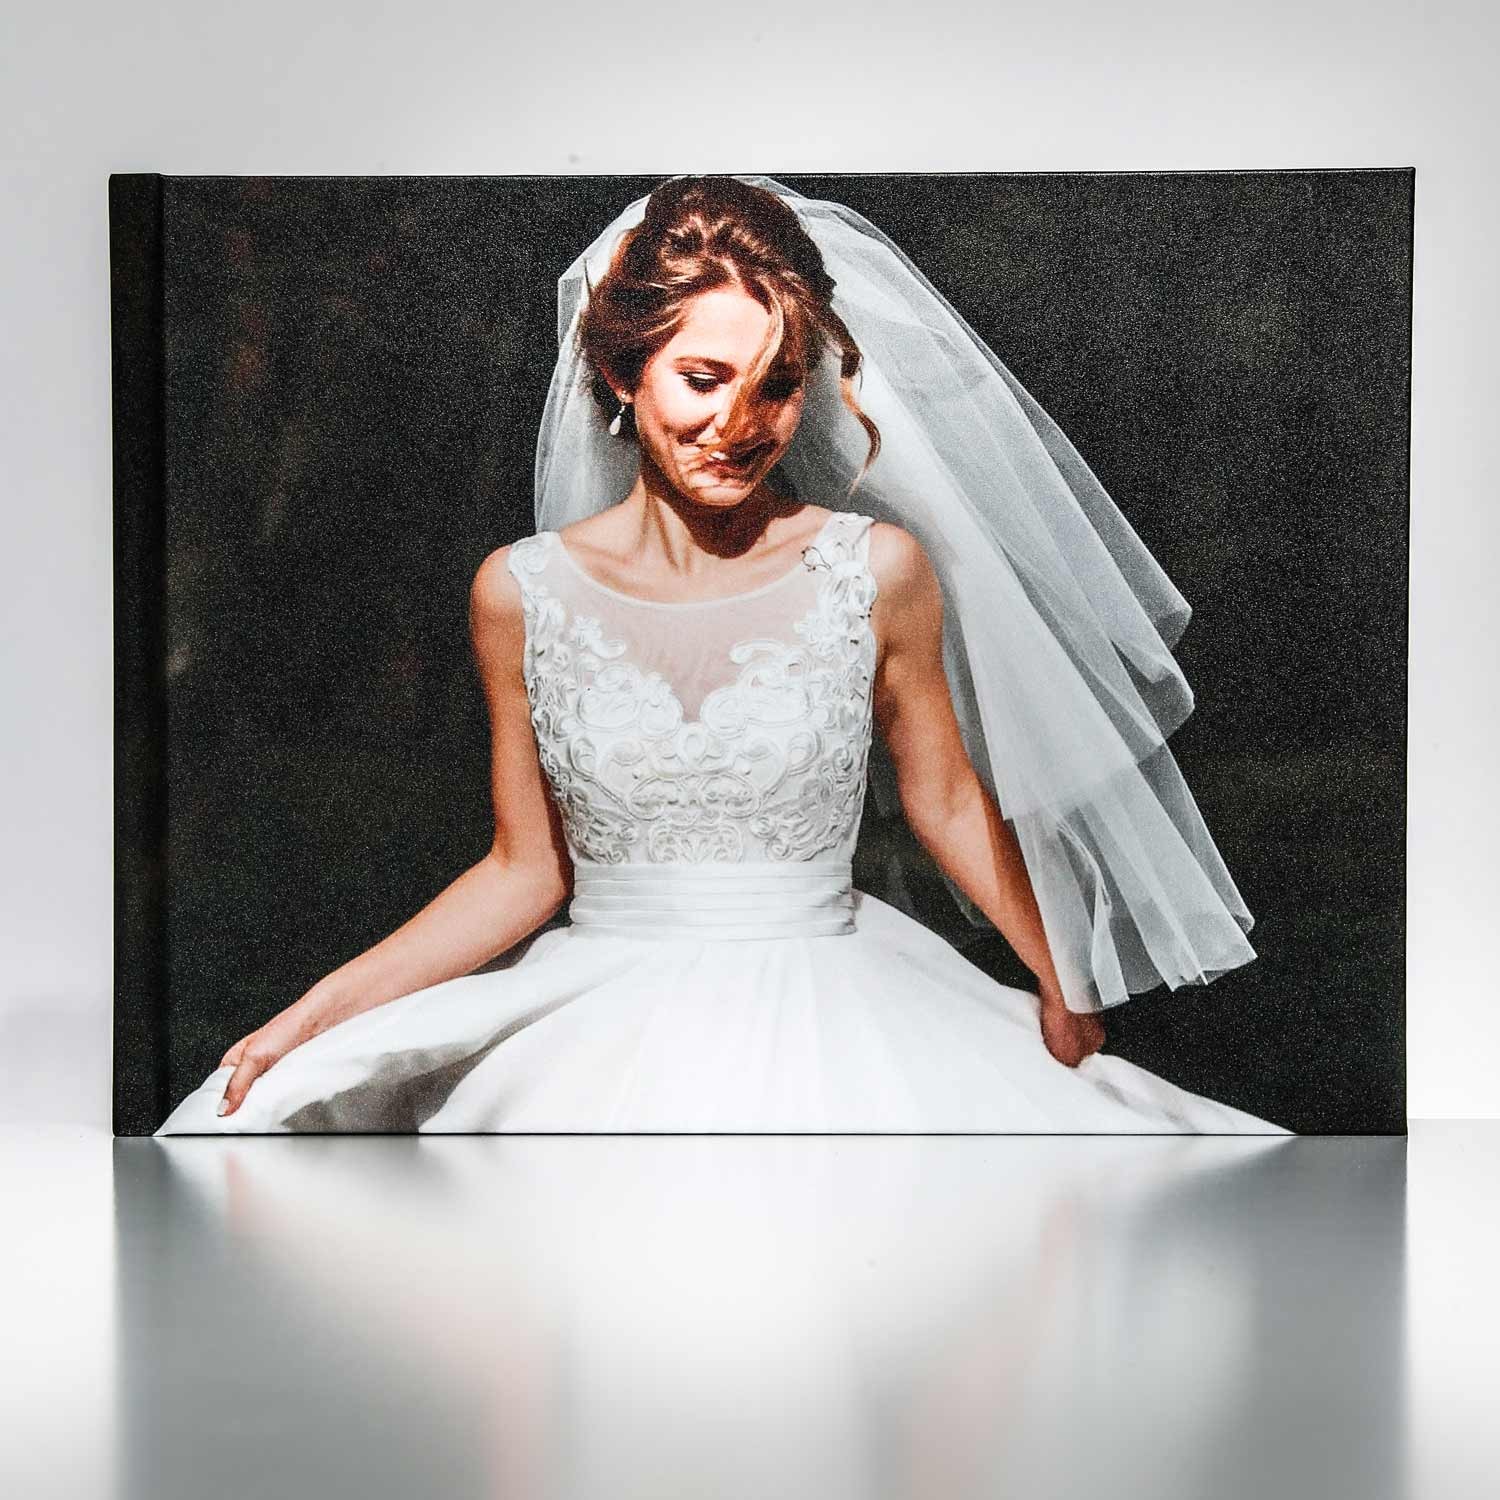 Silverbook 40x30cm with Photo Cover